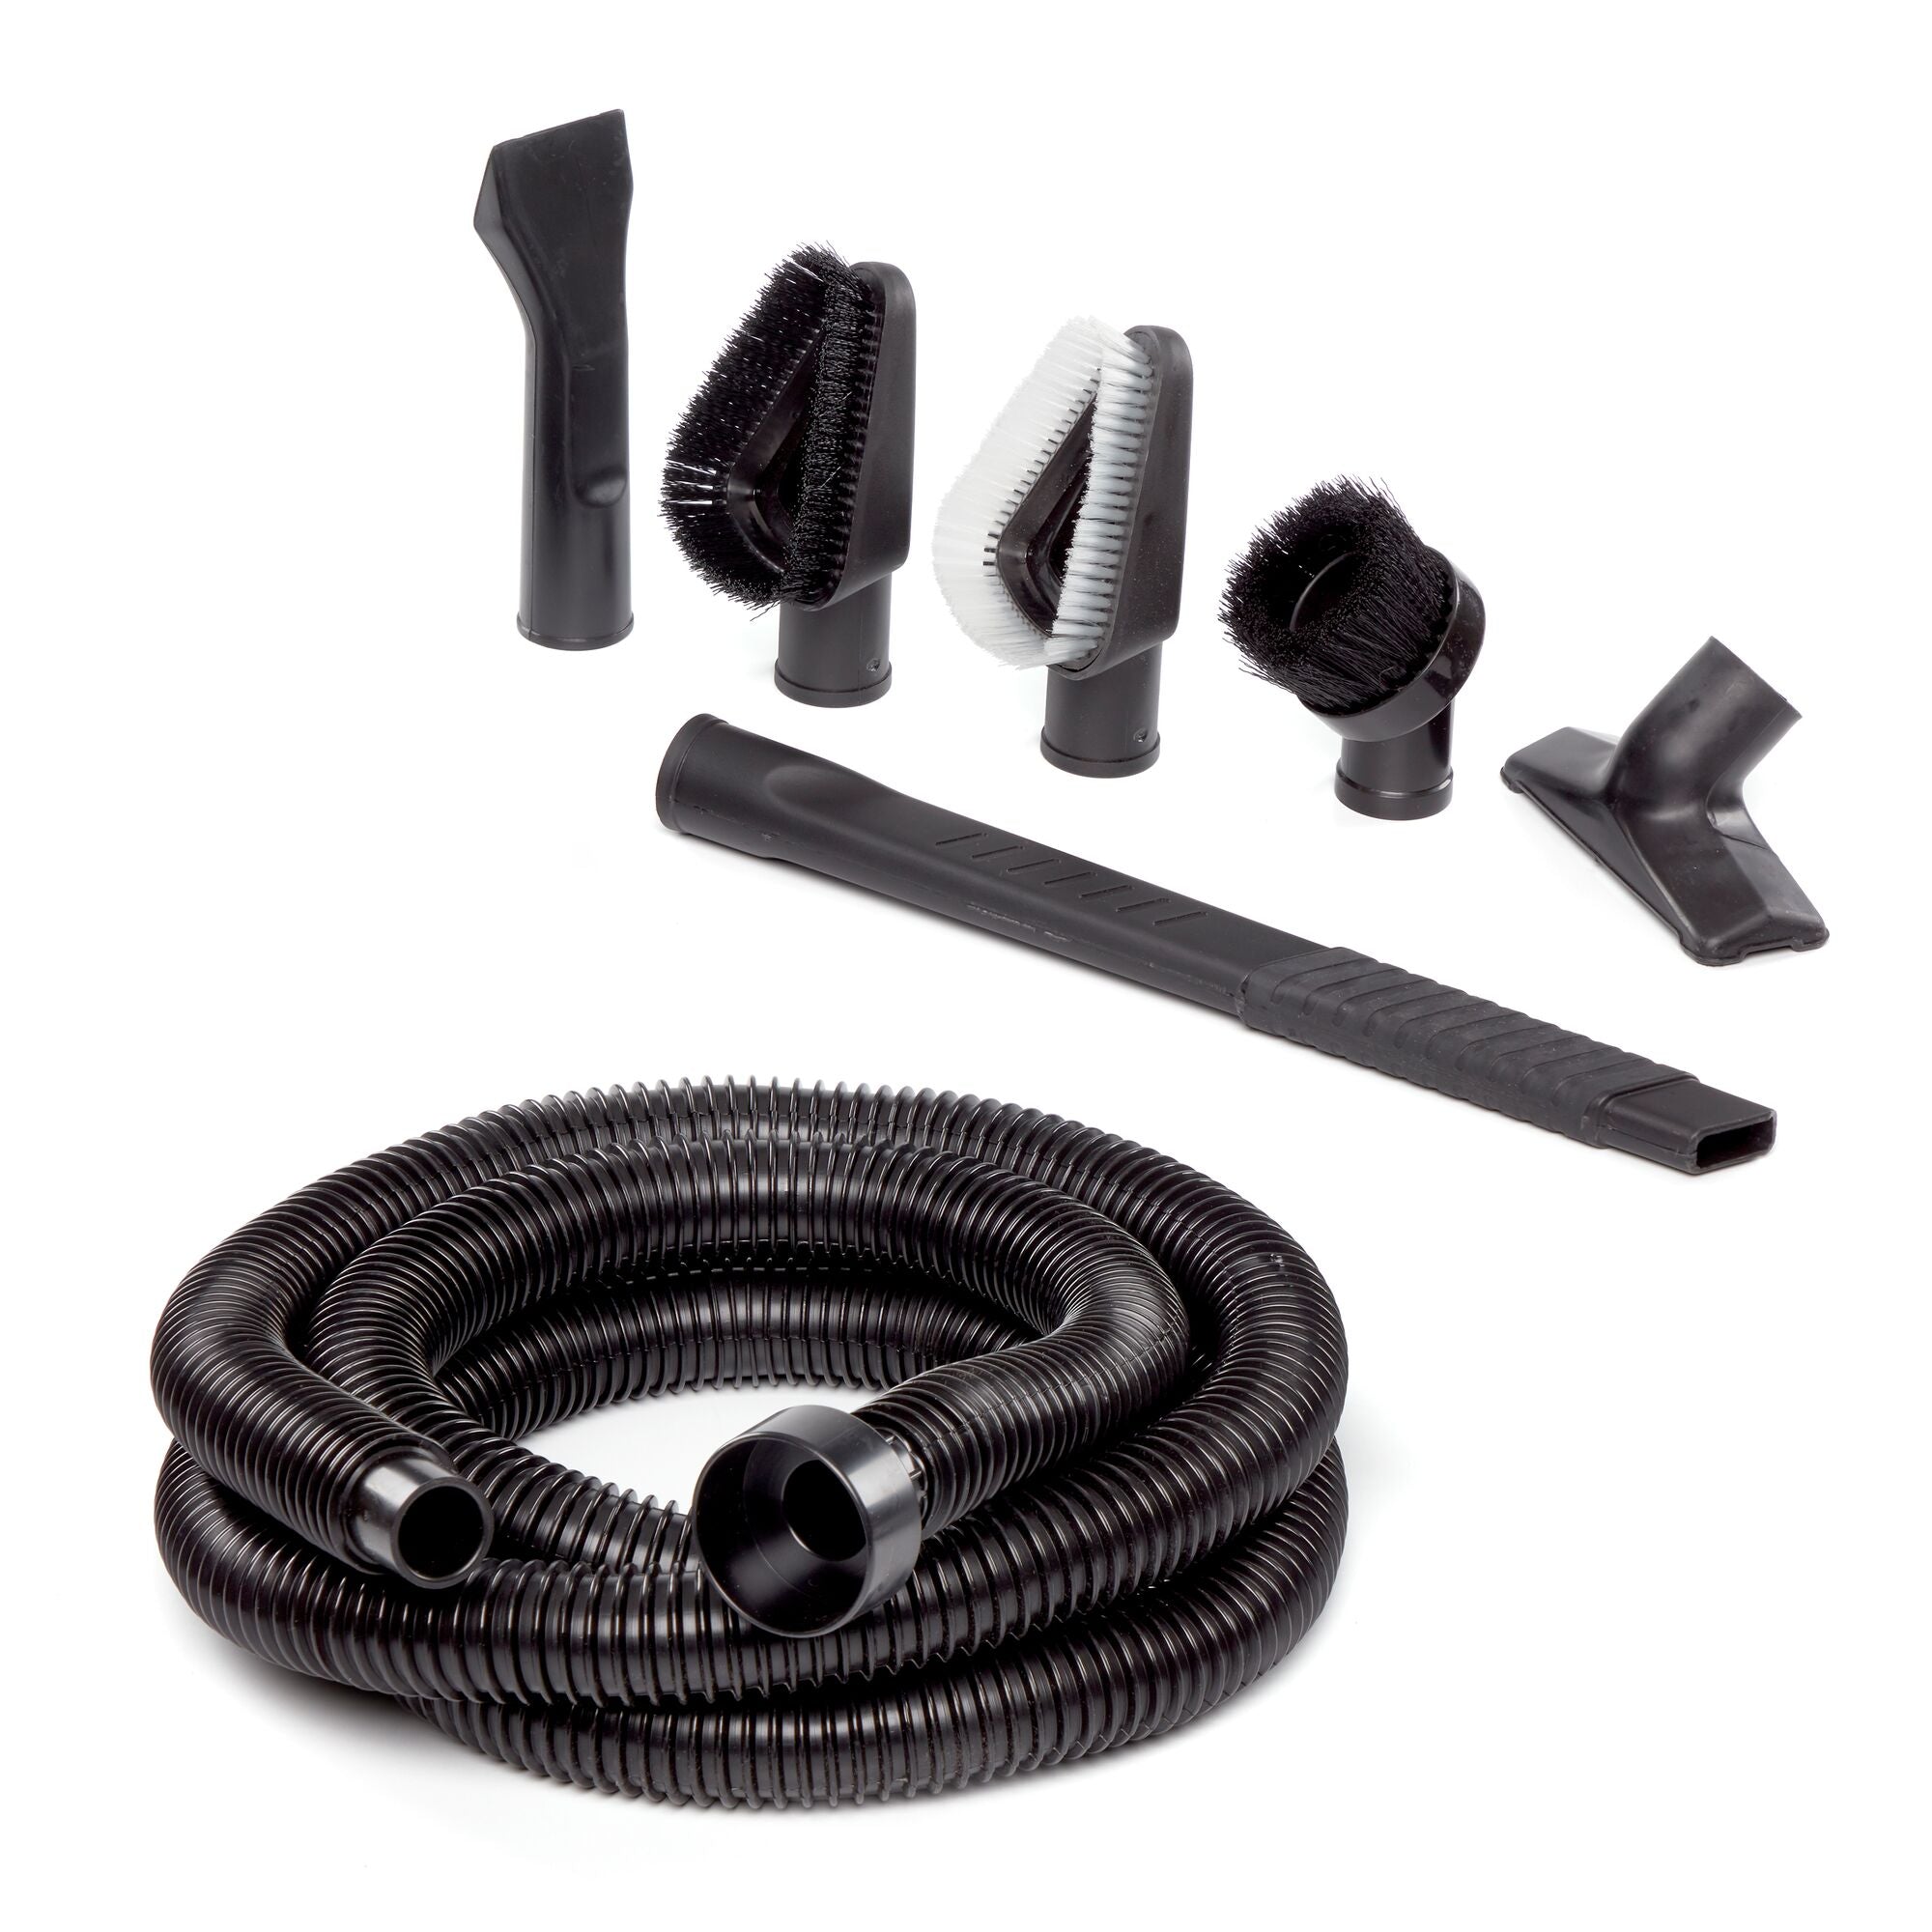 CMXZVBE38801 1-1/4 in. Wet/Dry Vac Car Cleaning Attachment Kit for Sho